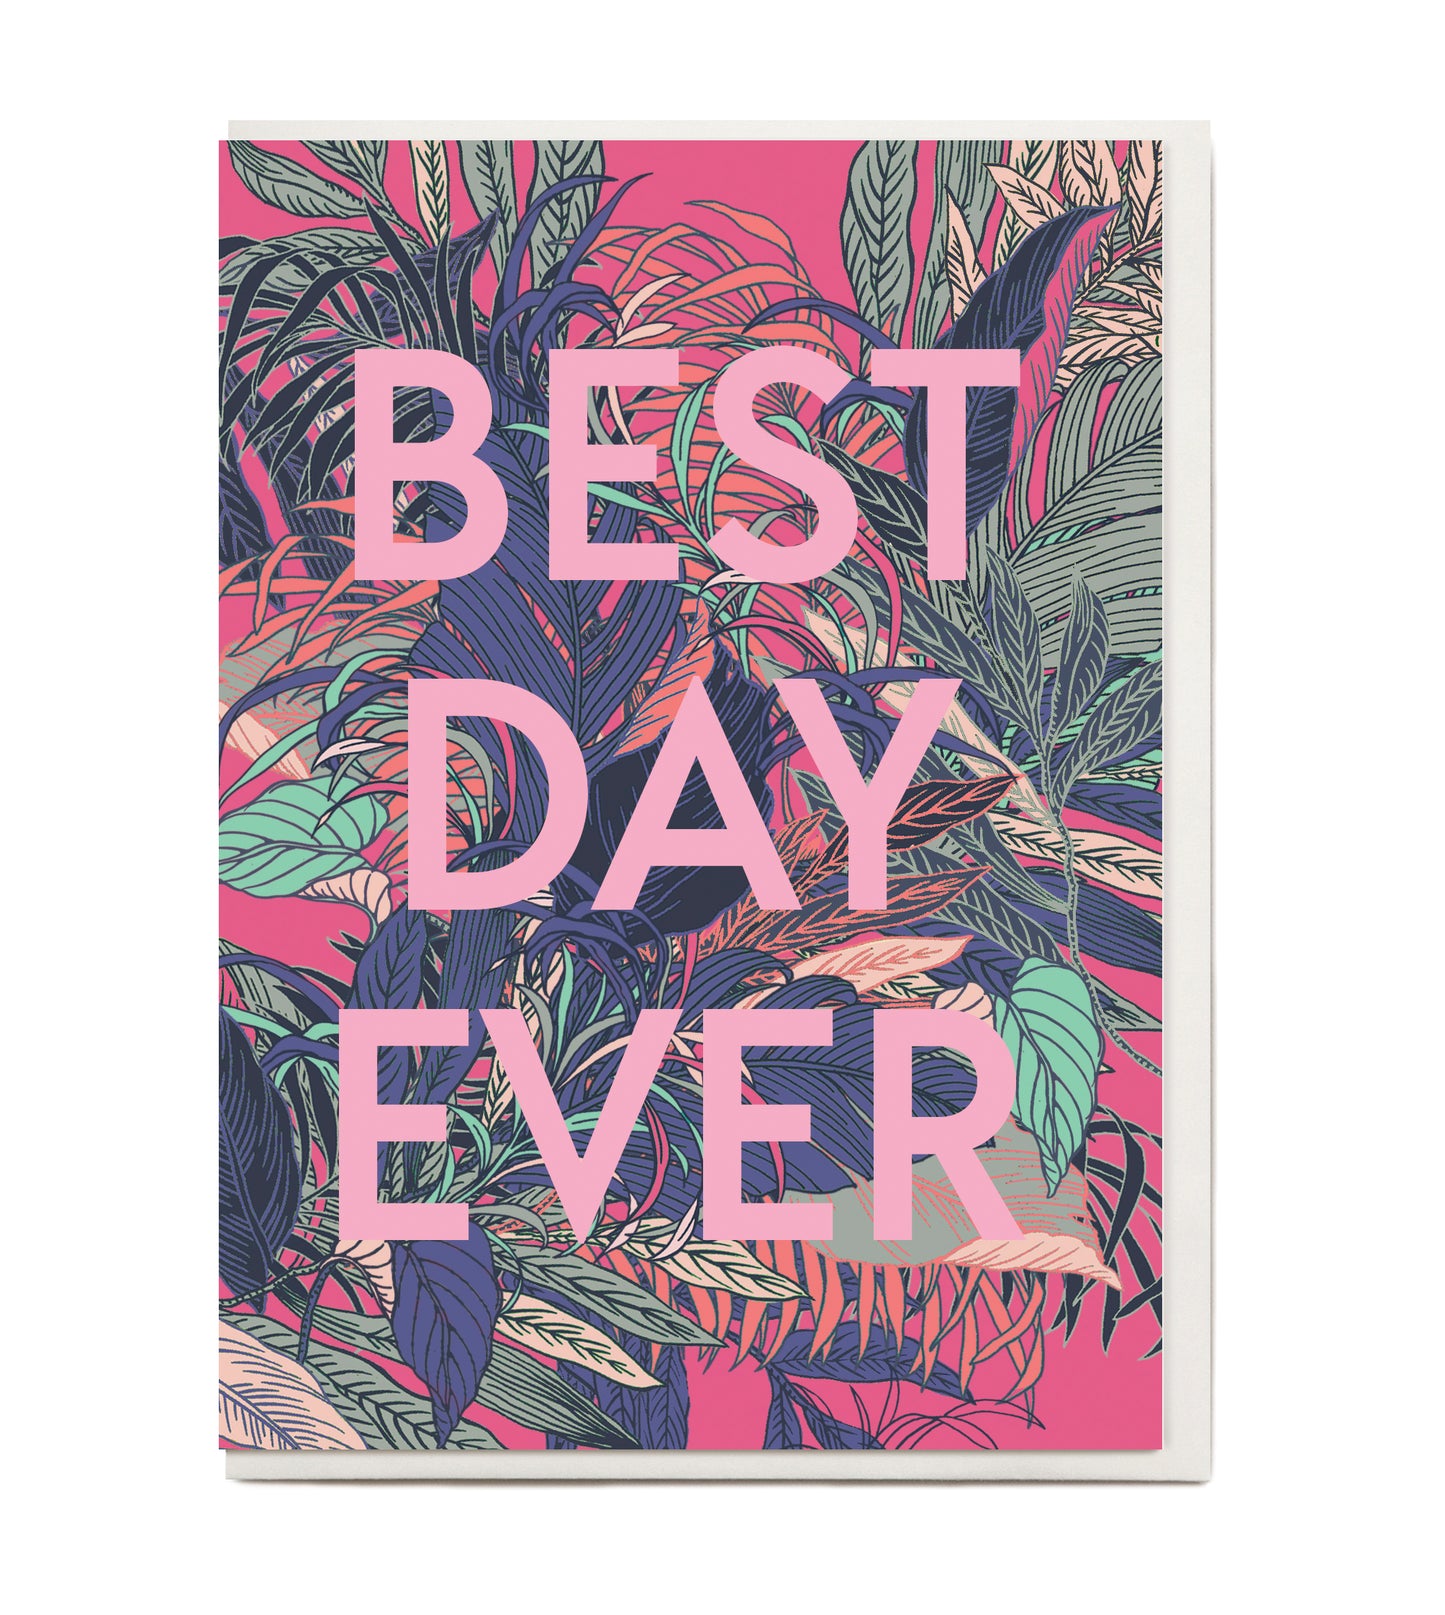 New! Best Day Ever Greeting Card